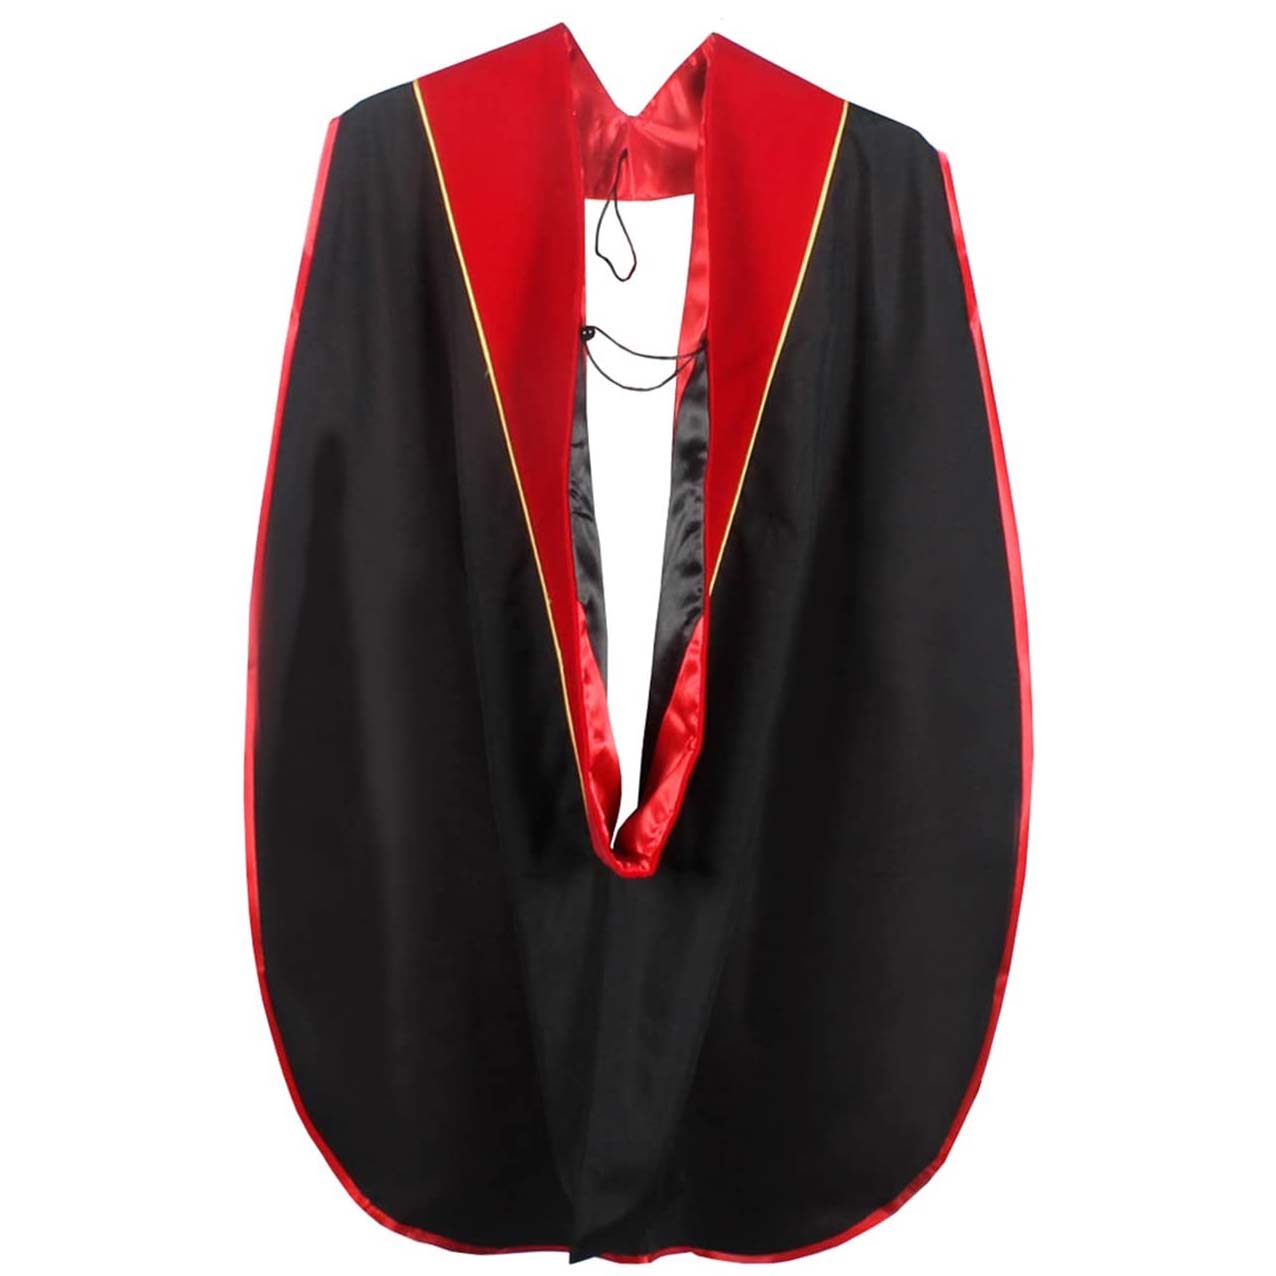 Doctorate Hood - Red Velvet - Red Lining - Black Chevron - Gold Piping